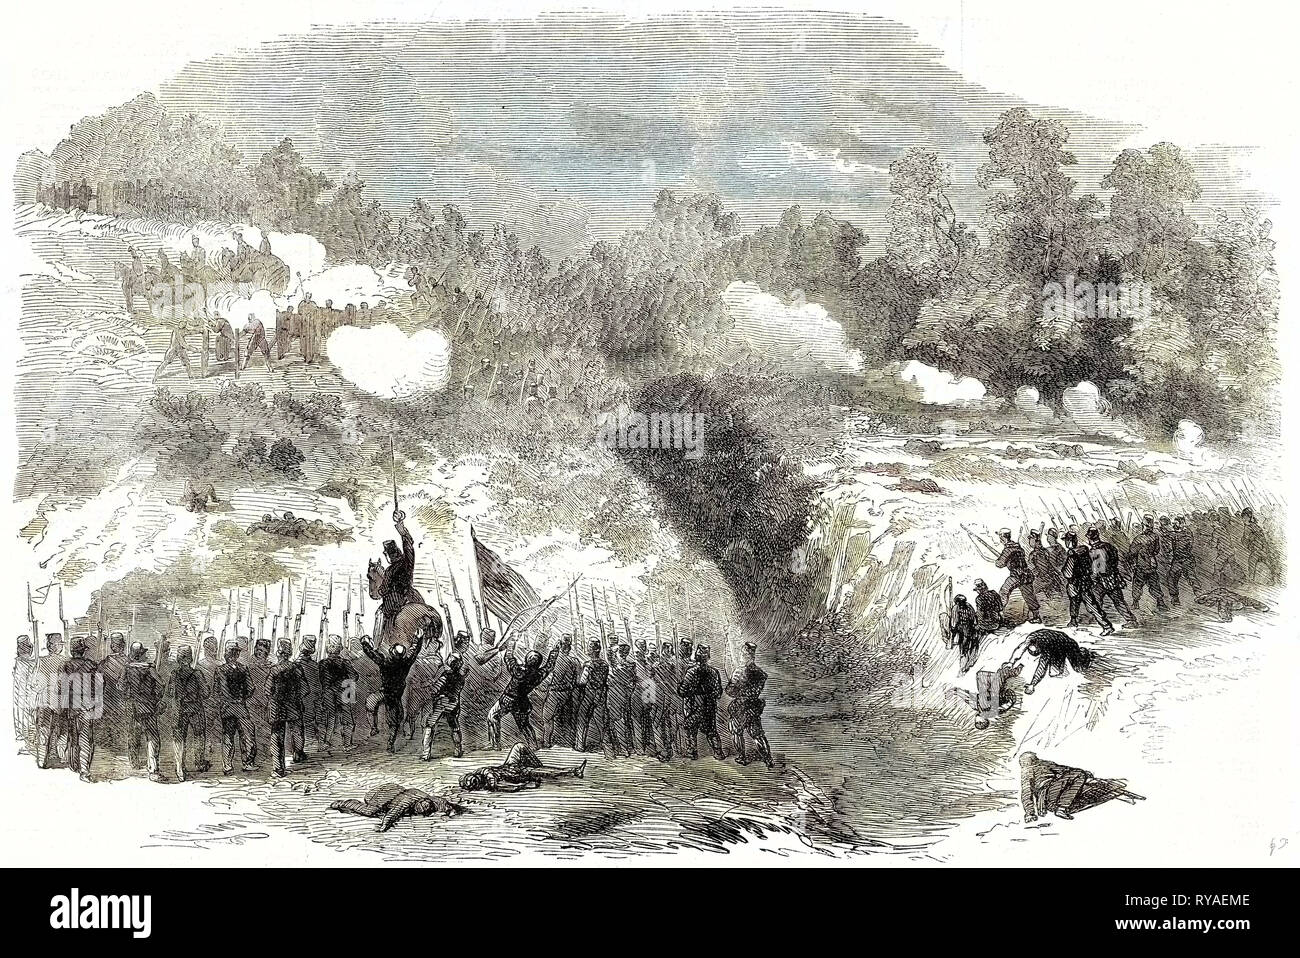 The Civil War in America: Attack on the Confederate Batteries at Bull Run by the 27th and 14th New York Regiments 17 August 1861 Stock Photo